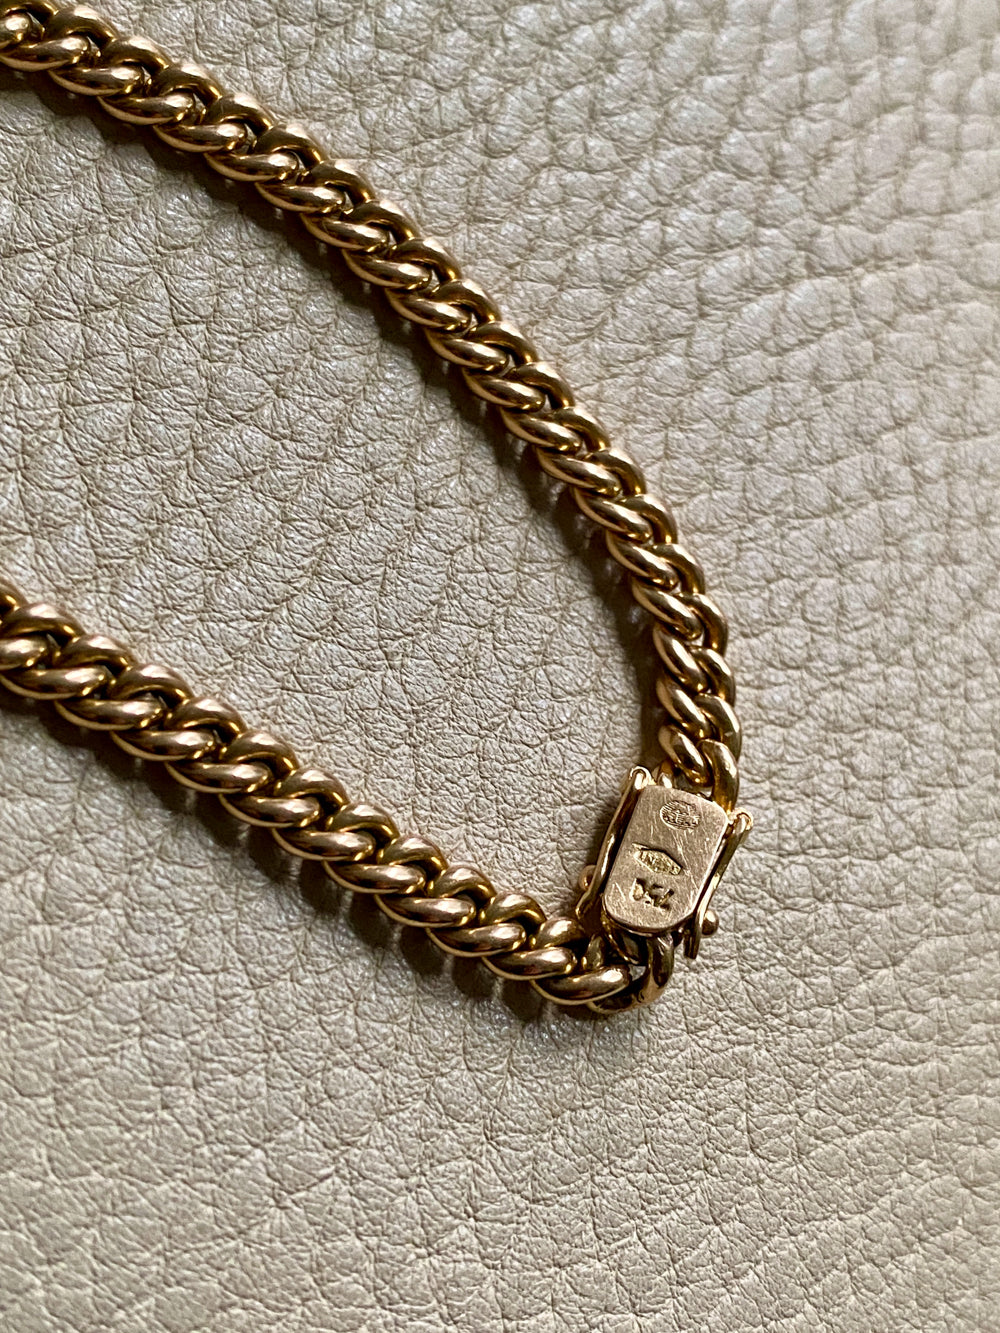 Italian vintage - Dense round curb link bracelet in 18k yellow gold - 7.25 inch length